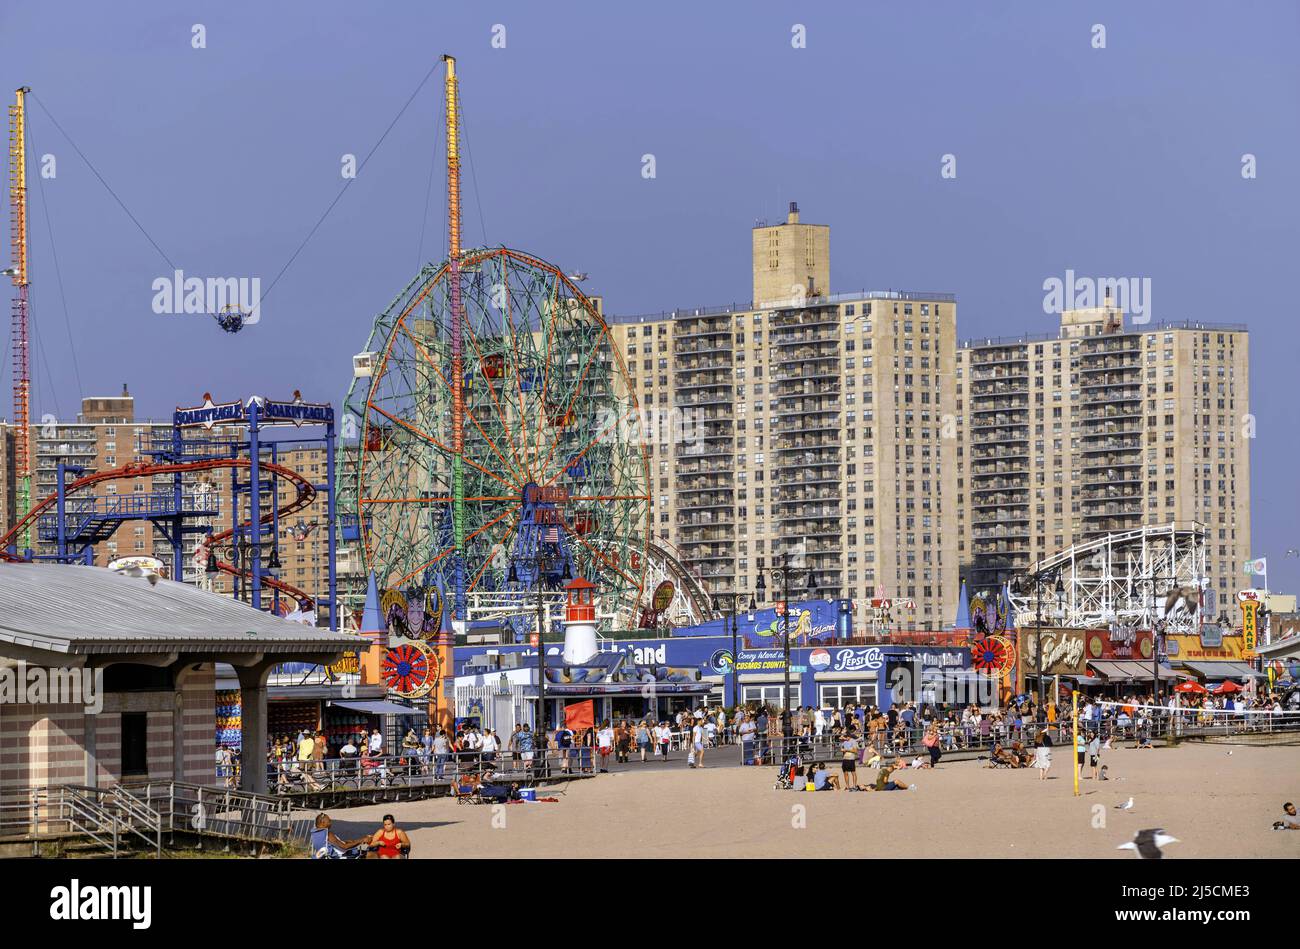 USA, Coney Island, Sept. 22, 2019. beach of Coney Island with the amusement parks and skyscrapers behind on Sept. 22, 2019. Coney Island is a residential neighborhood in Brooklyn that turns into a leisure and entertainment district every summer. [automated translation] Stock Photo